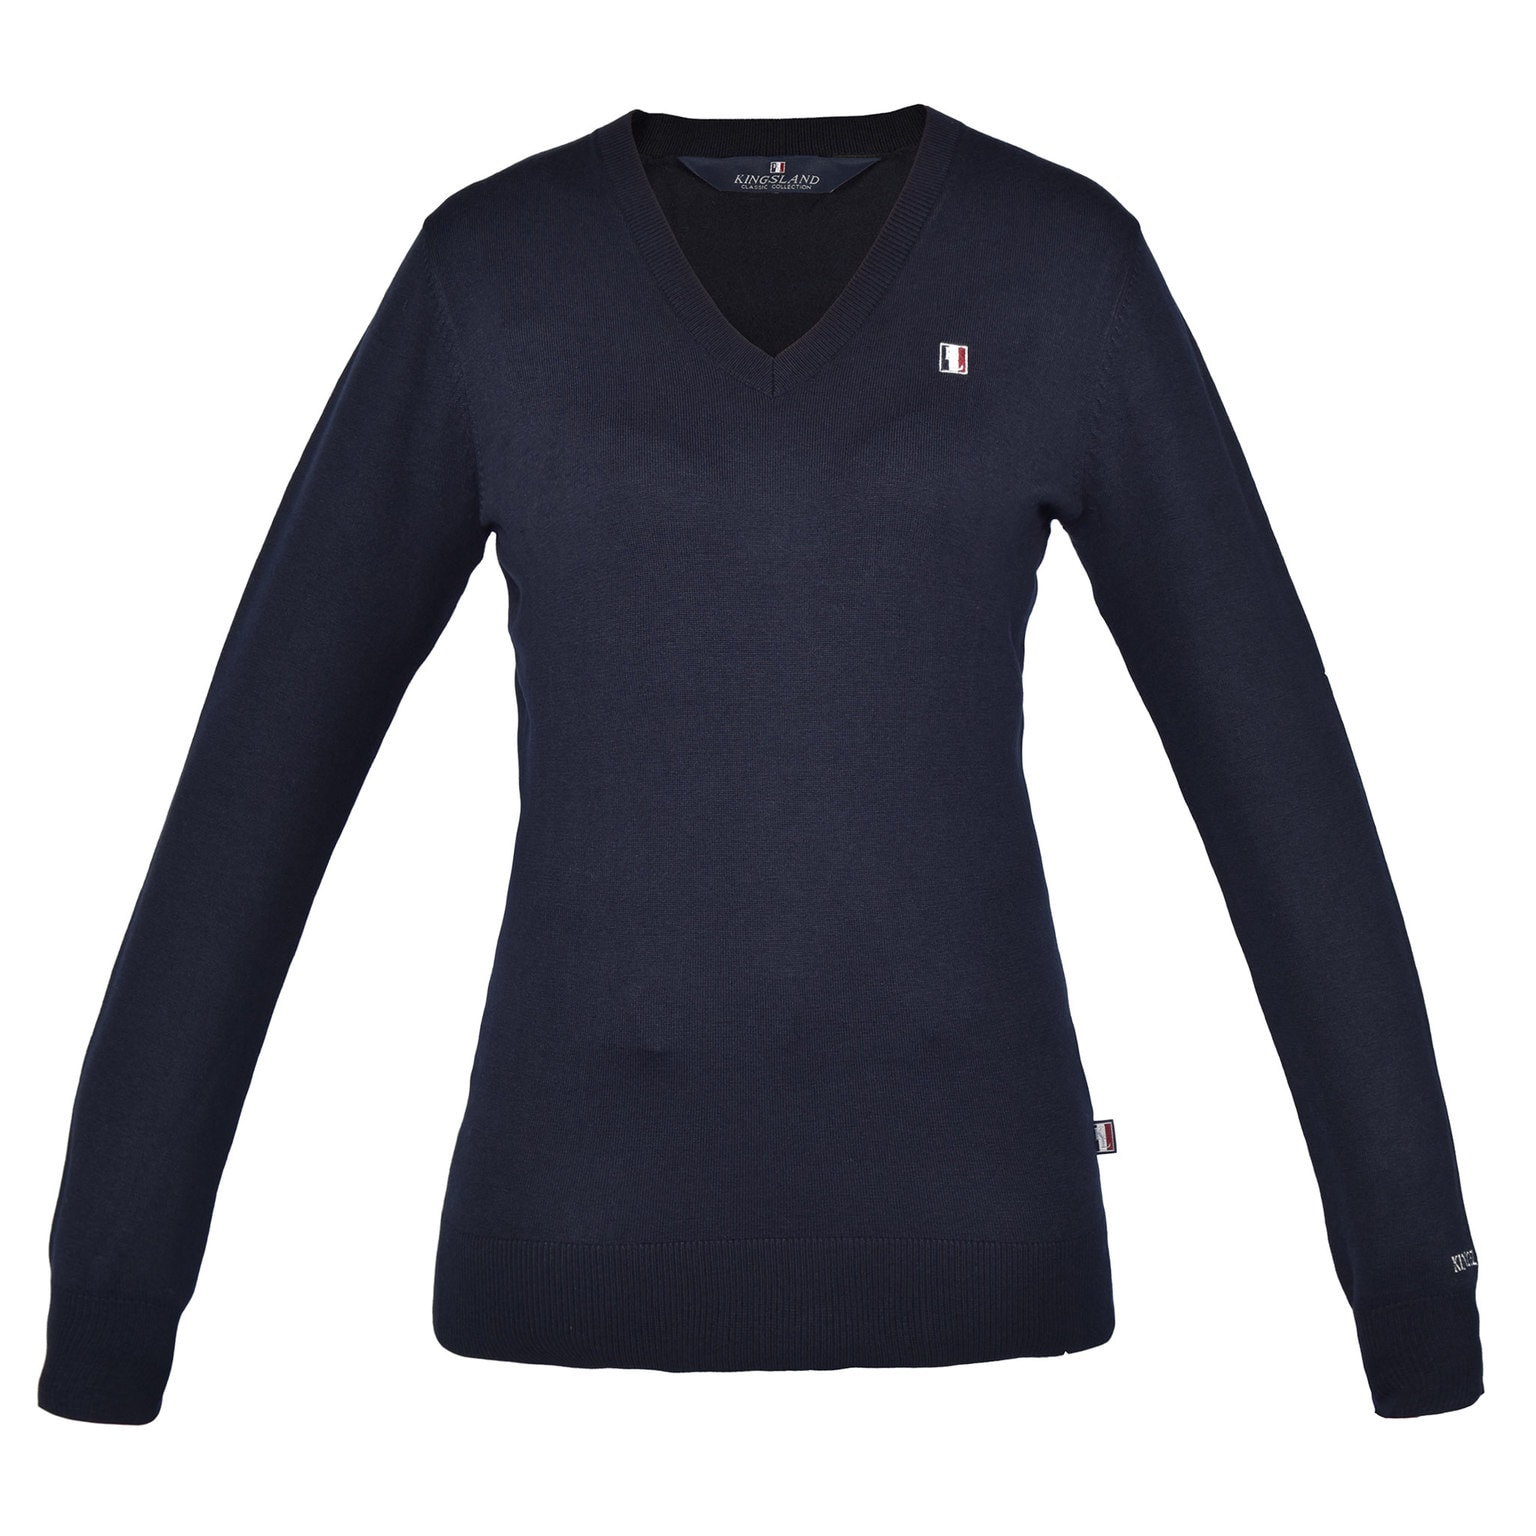 Classic Ladies Knitted Pullover - Navy